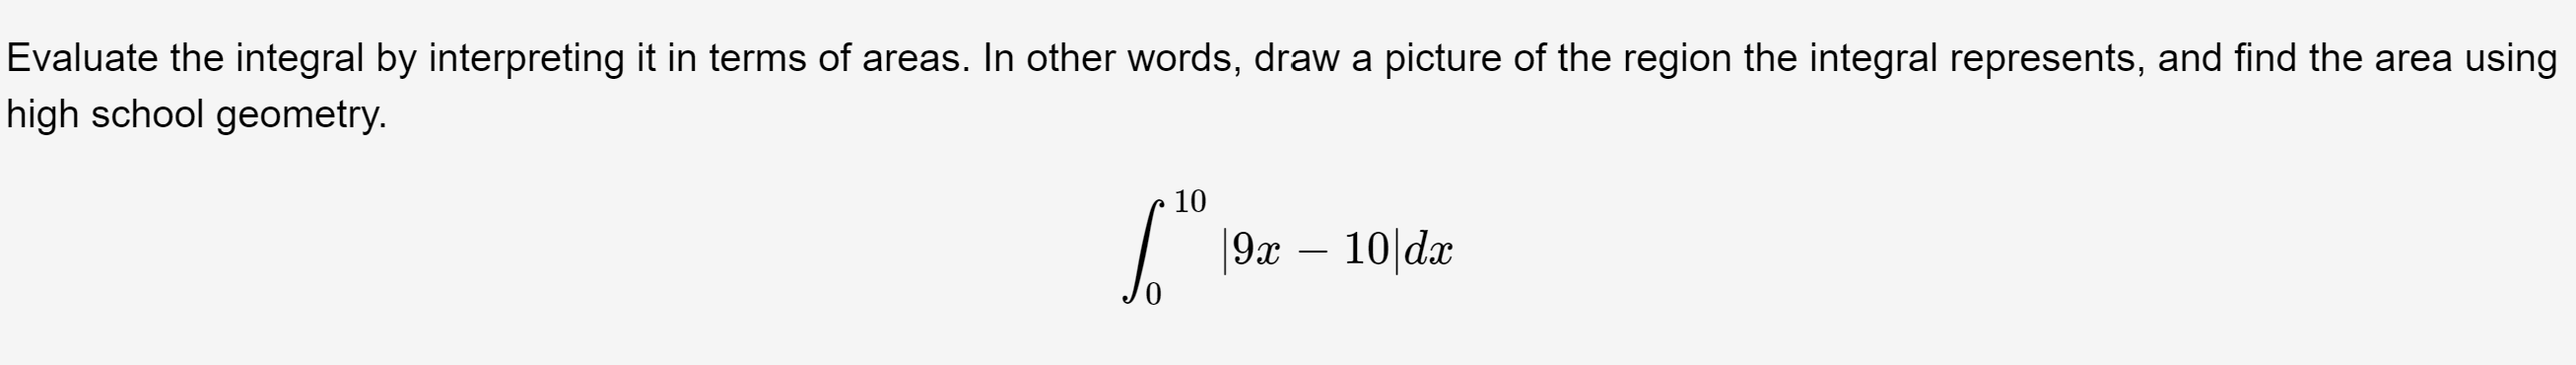 Evaluate the integral by interpreting it in terms of areas. In other words, draw a picture of the region the integral represents, and find the area using
high school geometry.
10
|9x – 10|dx
